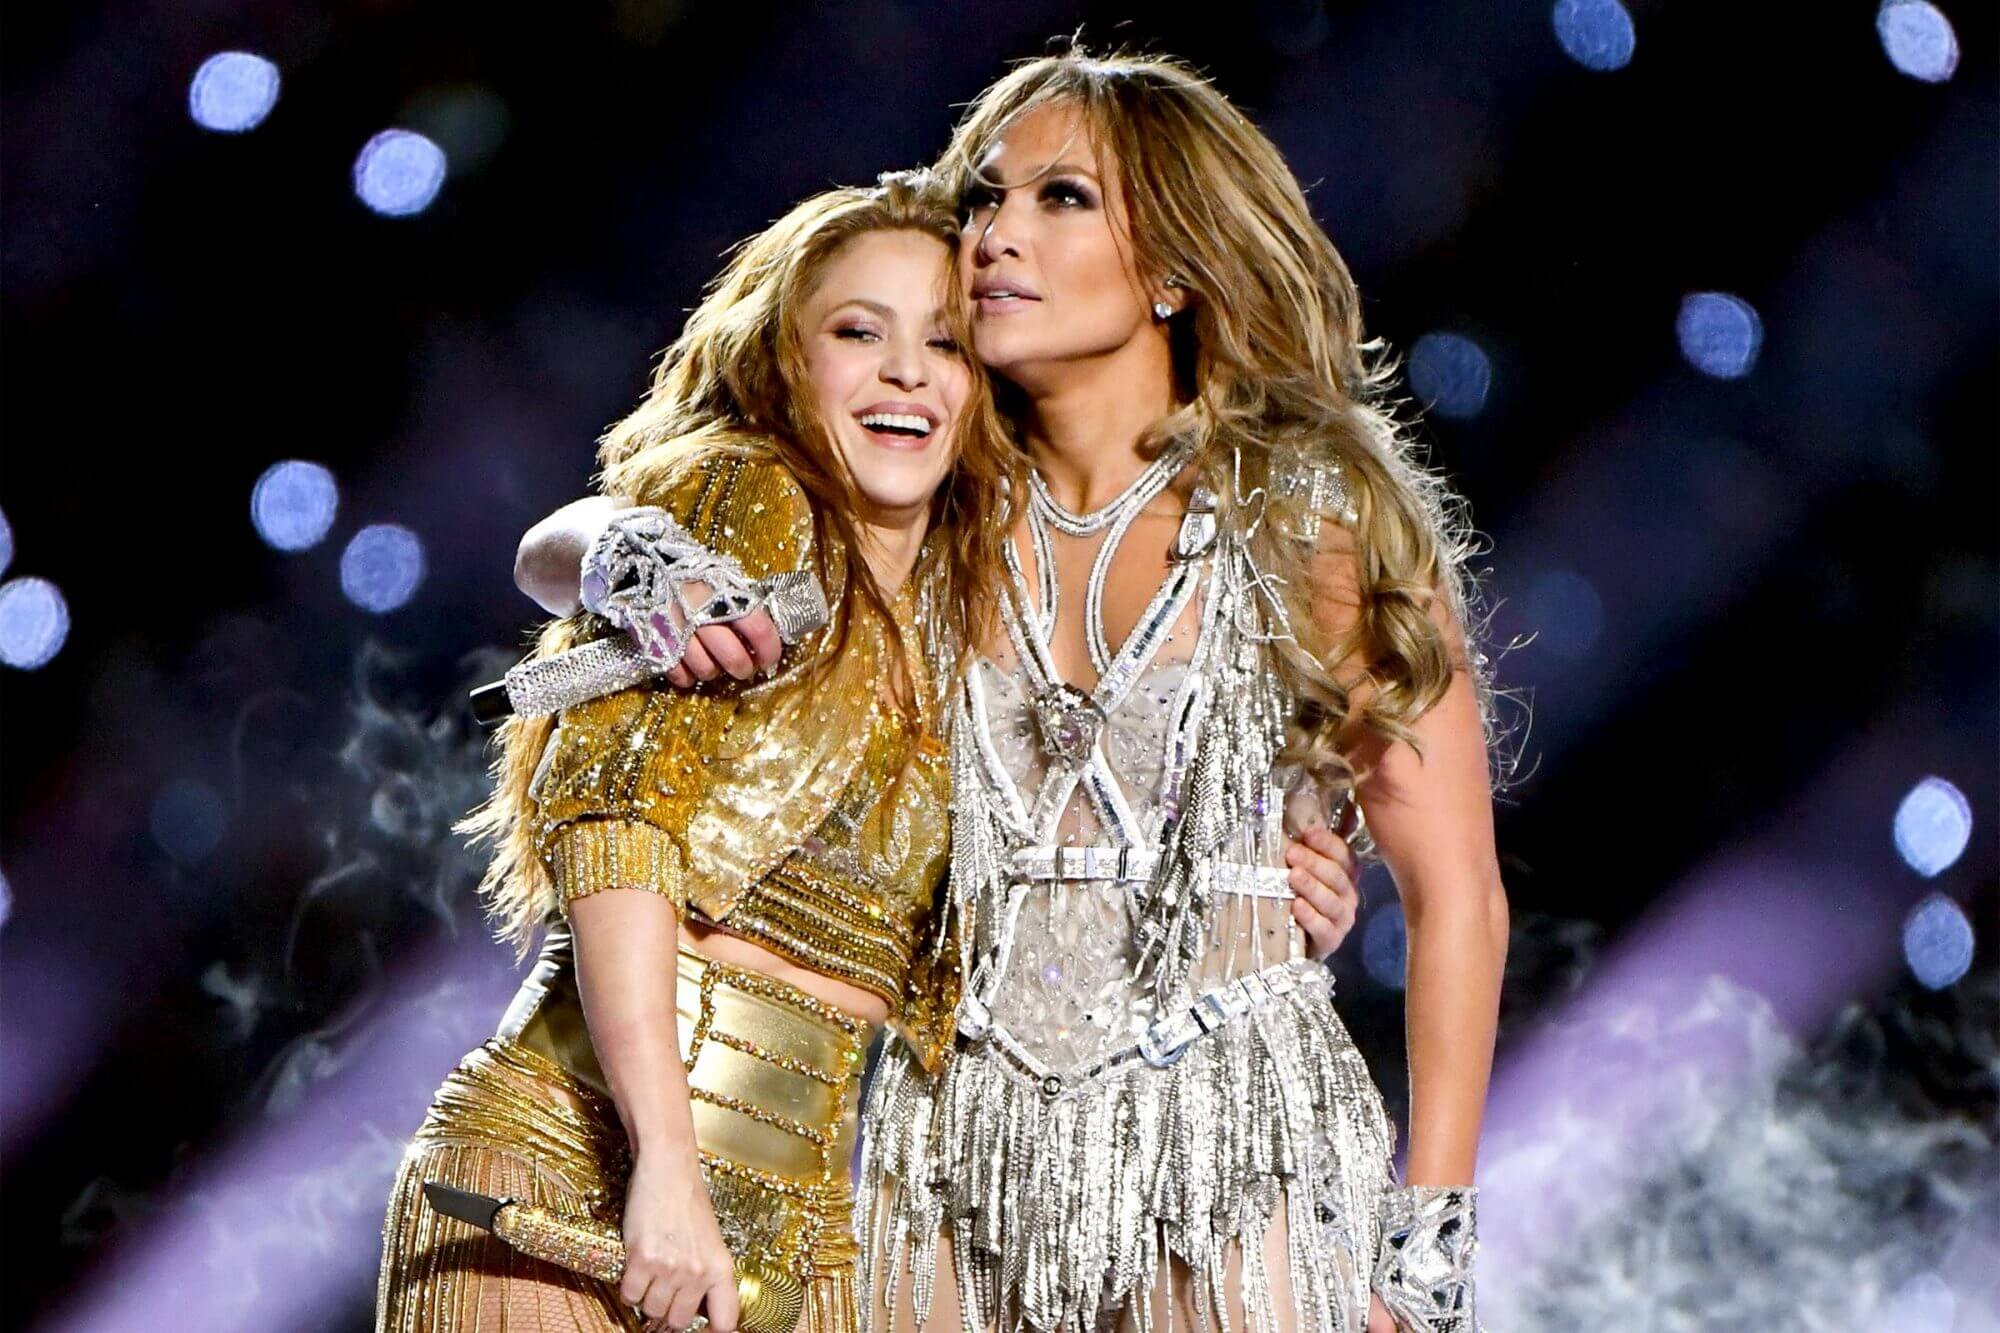 JLo and Shakira at the halftime event.